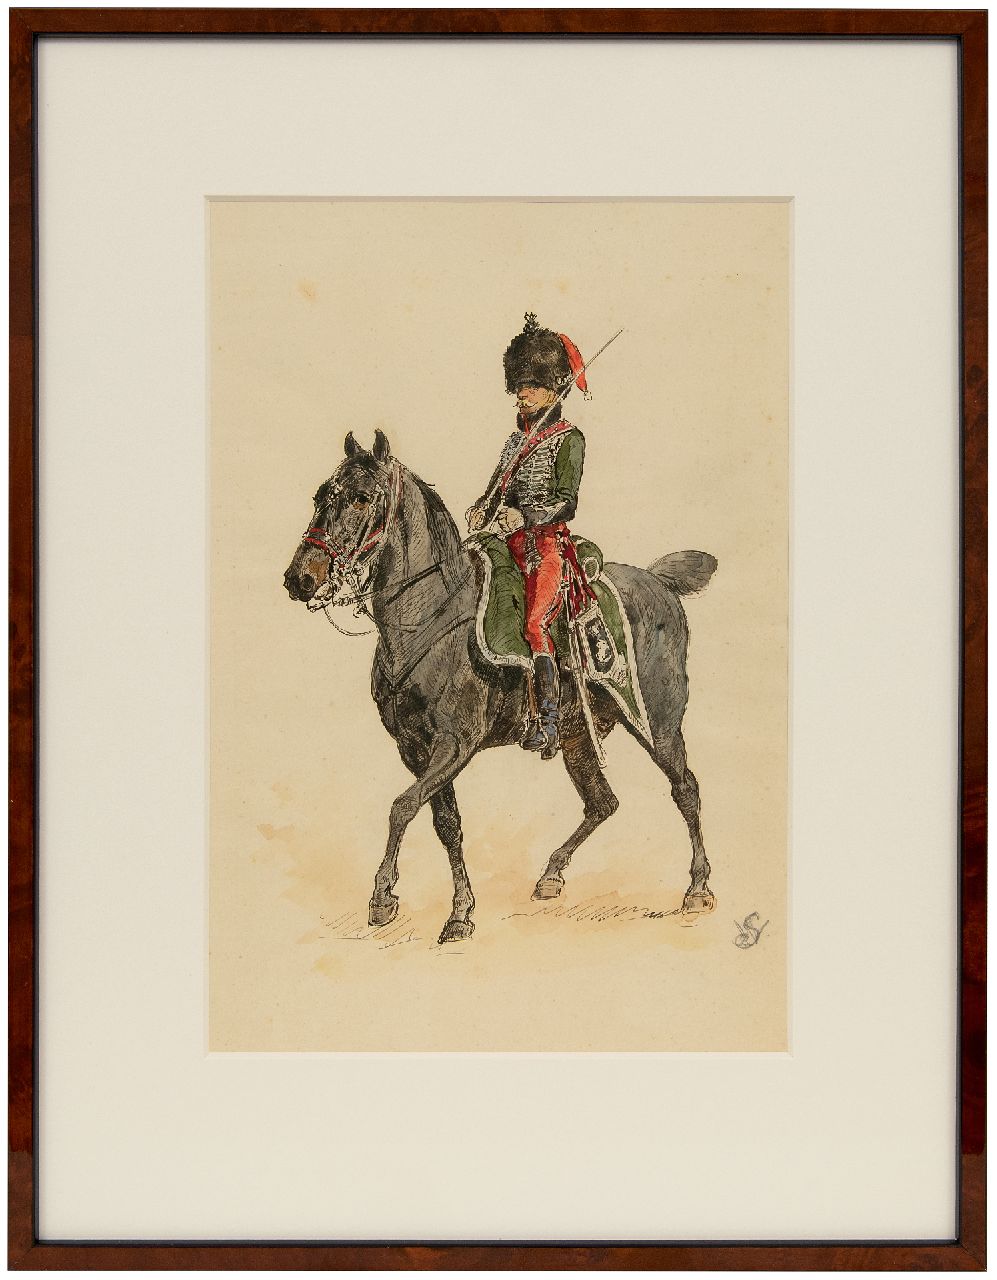 Staring W.C.  | Willem Constantijn Staring | Watercolours and drawings offered for sale | Dragoon on horseback, ink and watercolour on paper 33.5 x 21.0 cm, dated 1 April 1906 (in pencil)